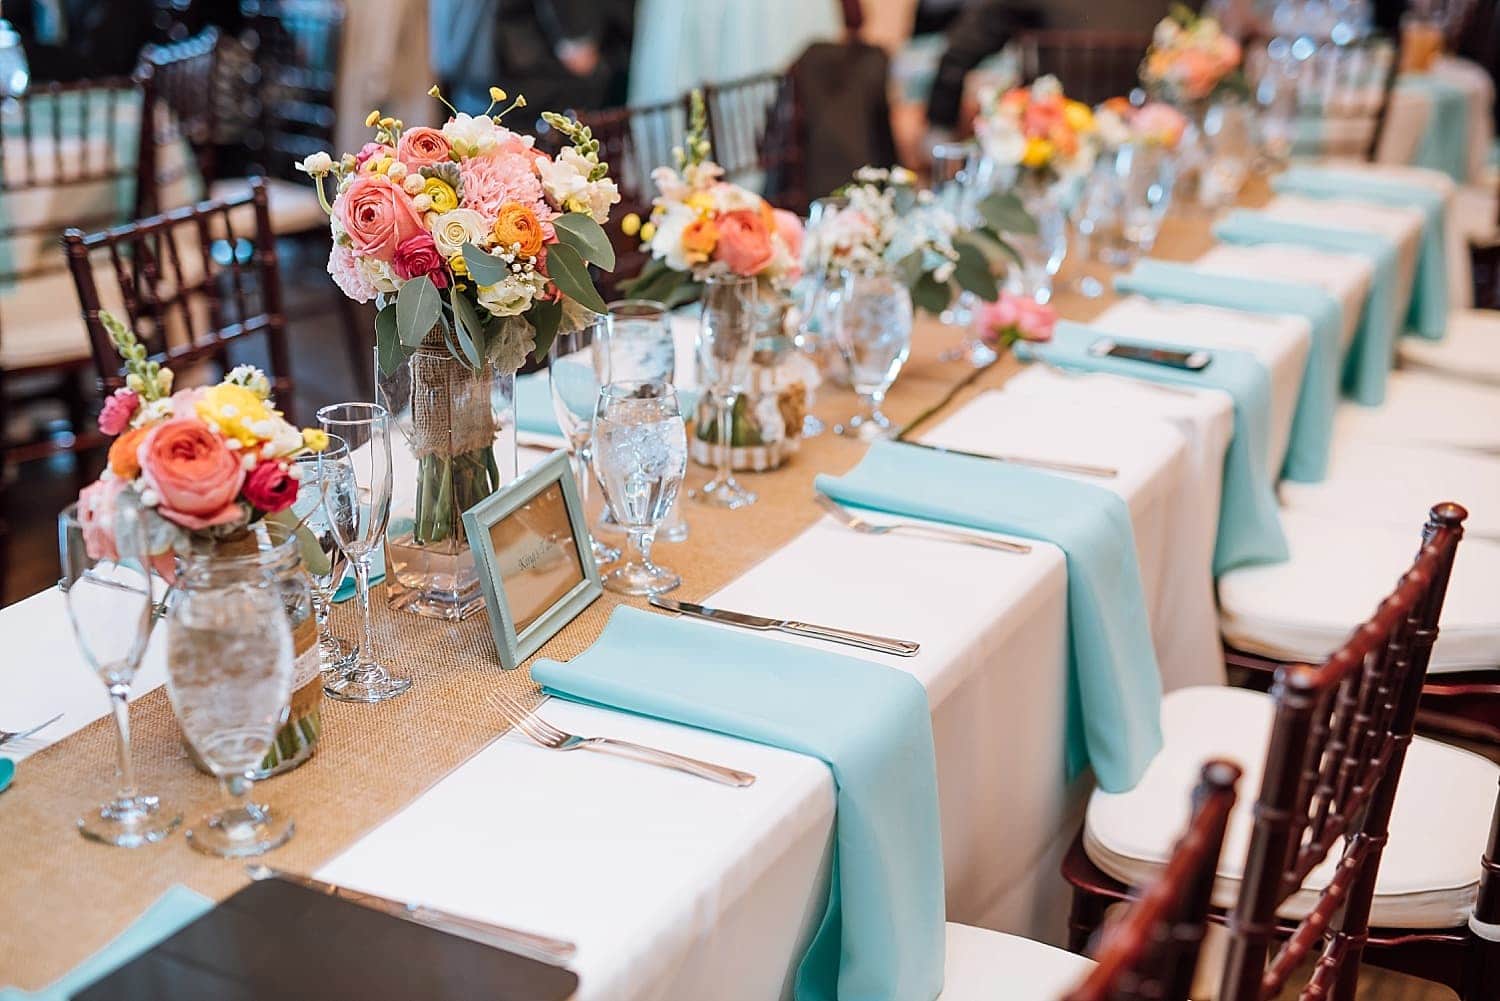 Table at bride and groom's ceremony decorated with a white table cloth, light blue linen, and floral arrangements in vases.